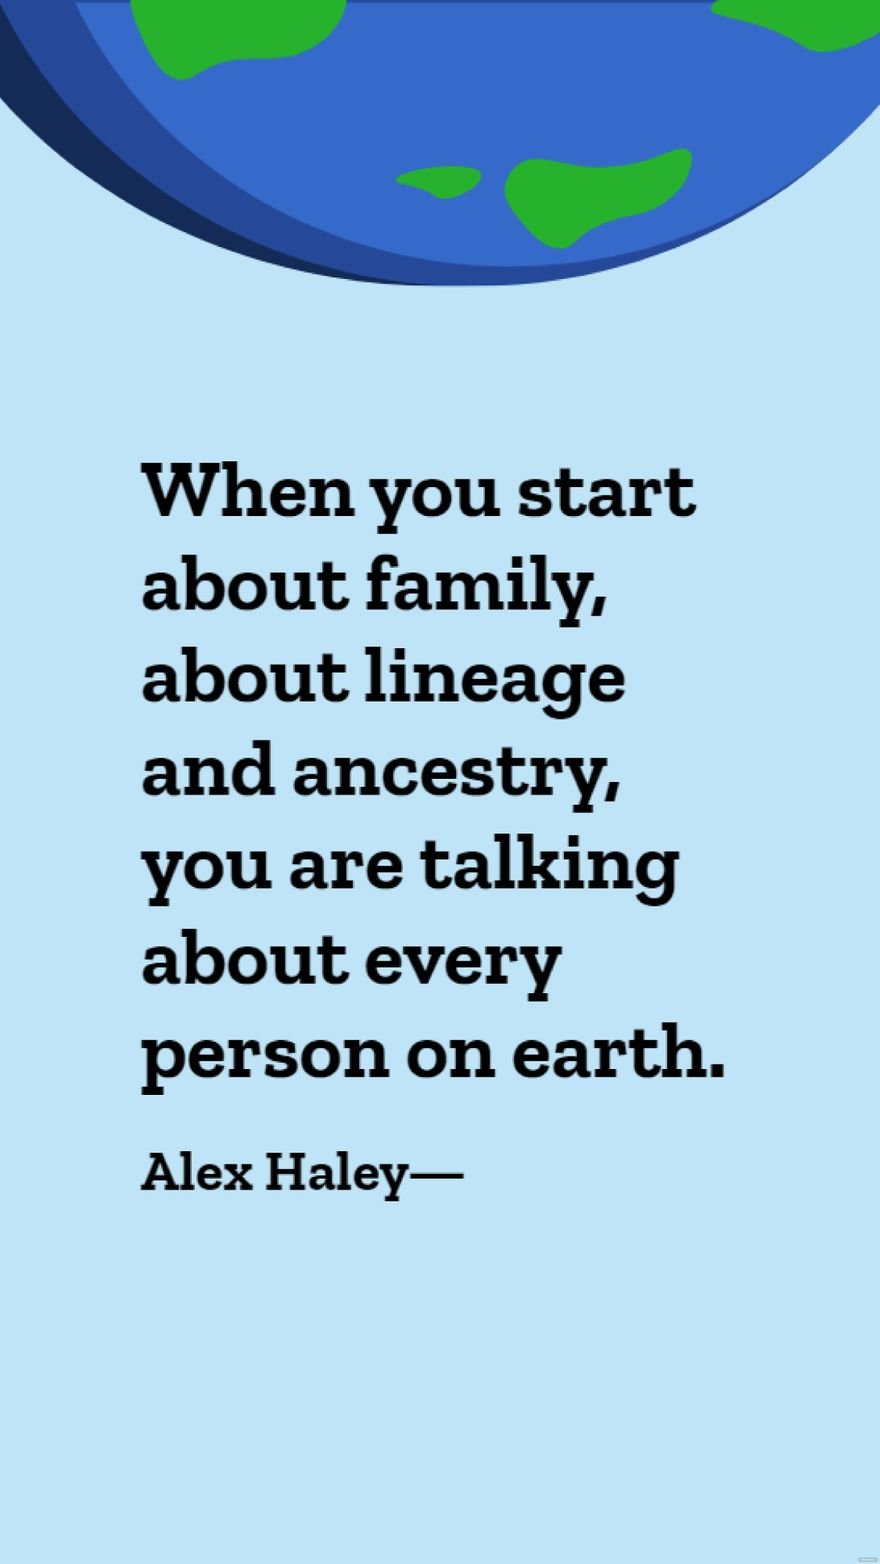 Alex Haley - When you start about family, about lineage and ancestry, you are talking about every person on earth. in JPG